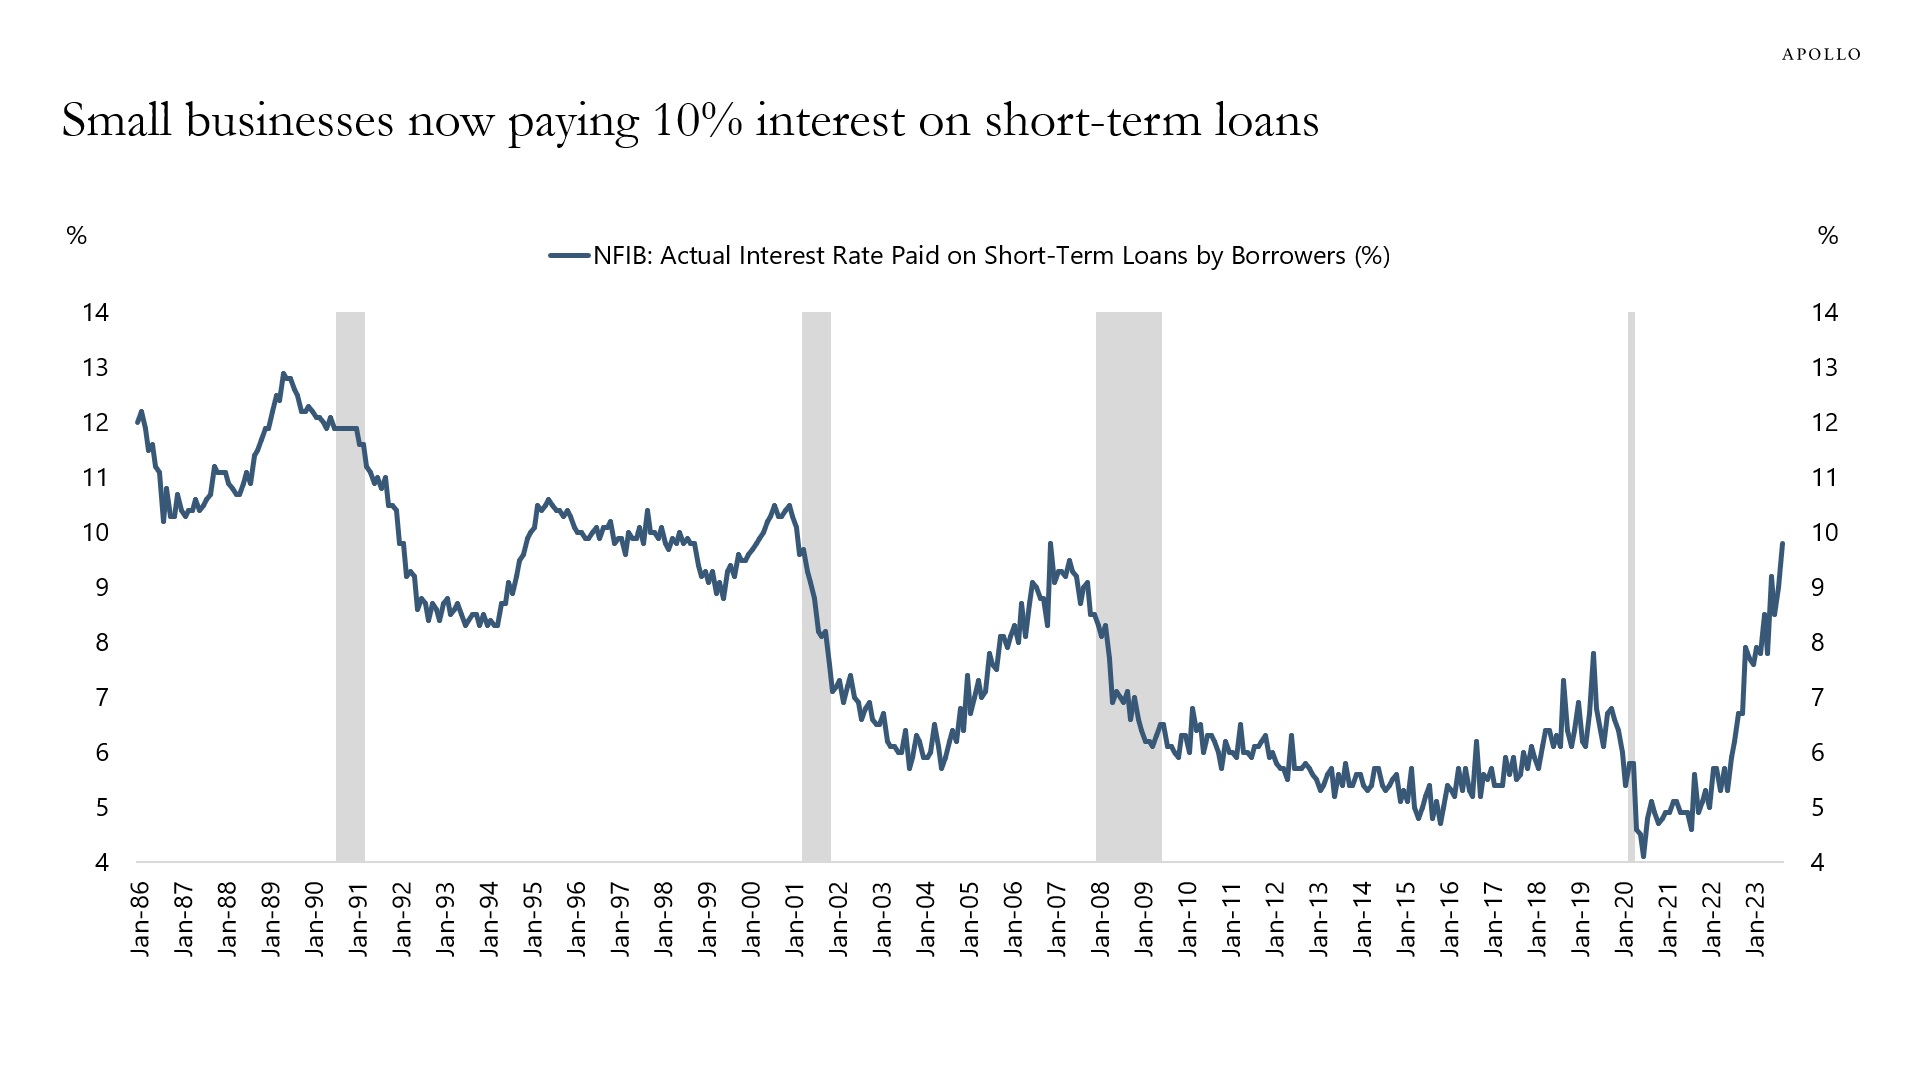 Interest rates on short-term small business loans are now at 10%